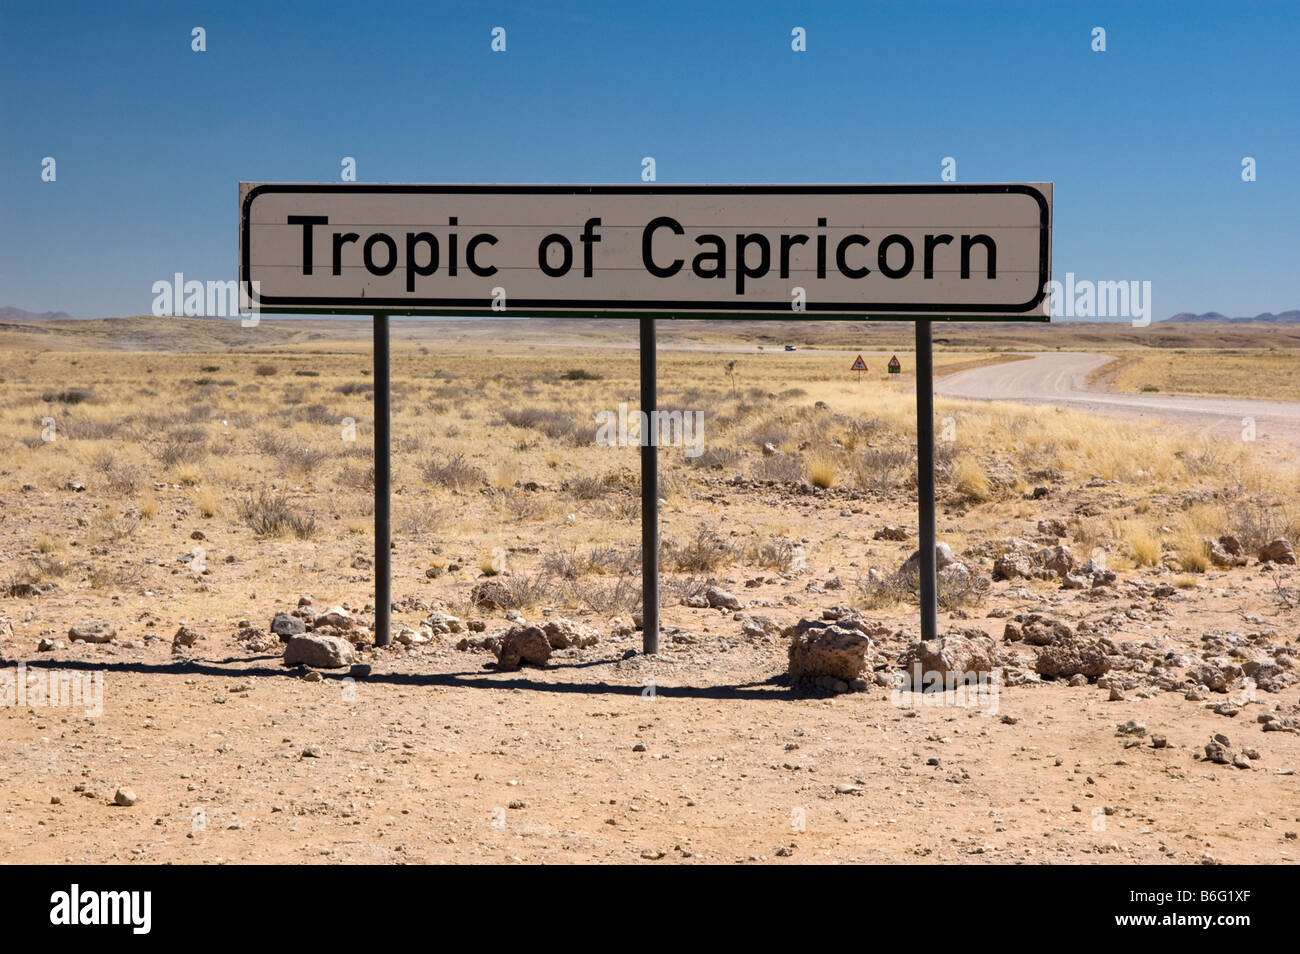 The Tropic of Capricorn marker sign Namibia Stock Photo